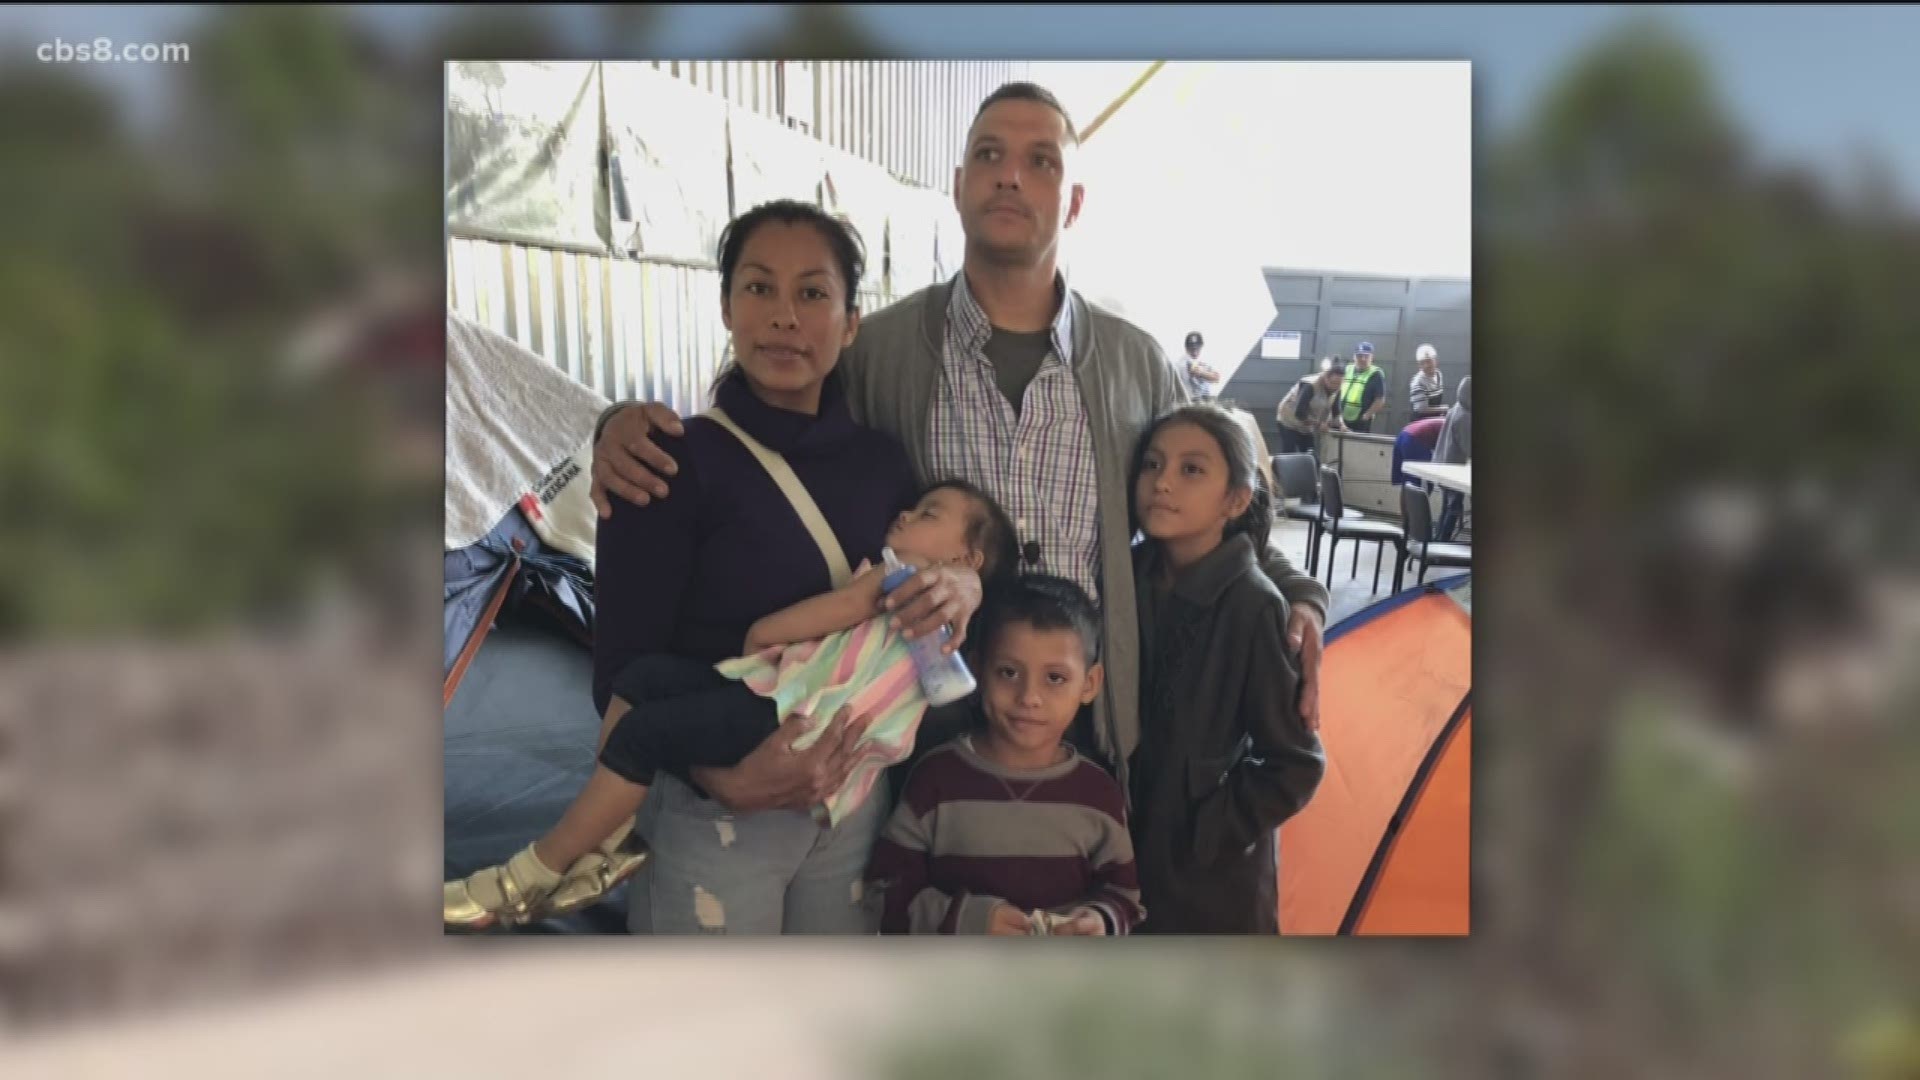 A U.S. citizen was among six victims gunned down in a mass shooting in Tijuana on August 18, just two days after the victim’s wife and kids crossed into the United States and claimed asylum.